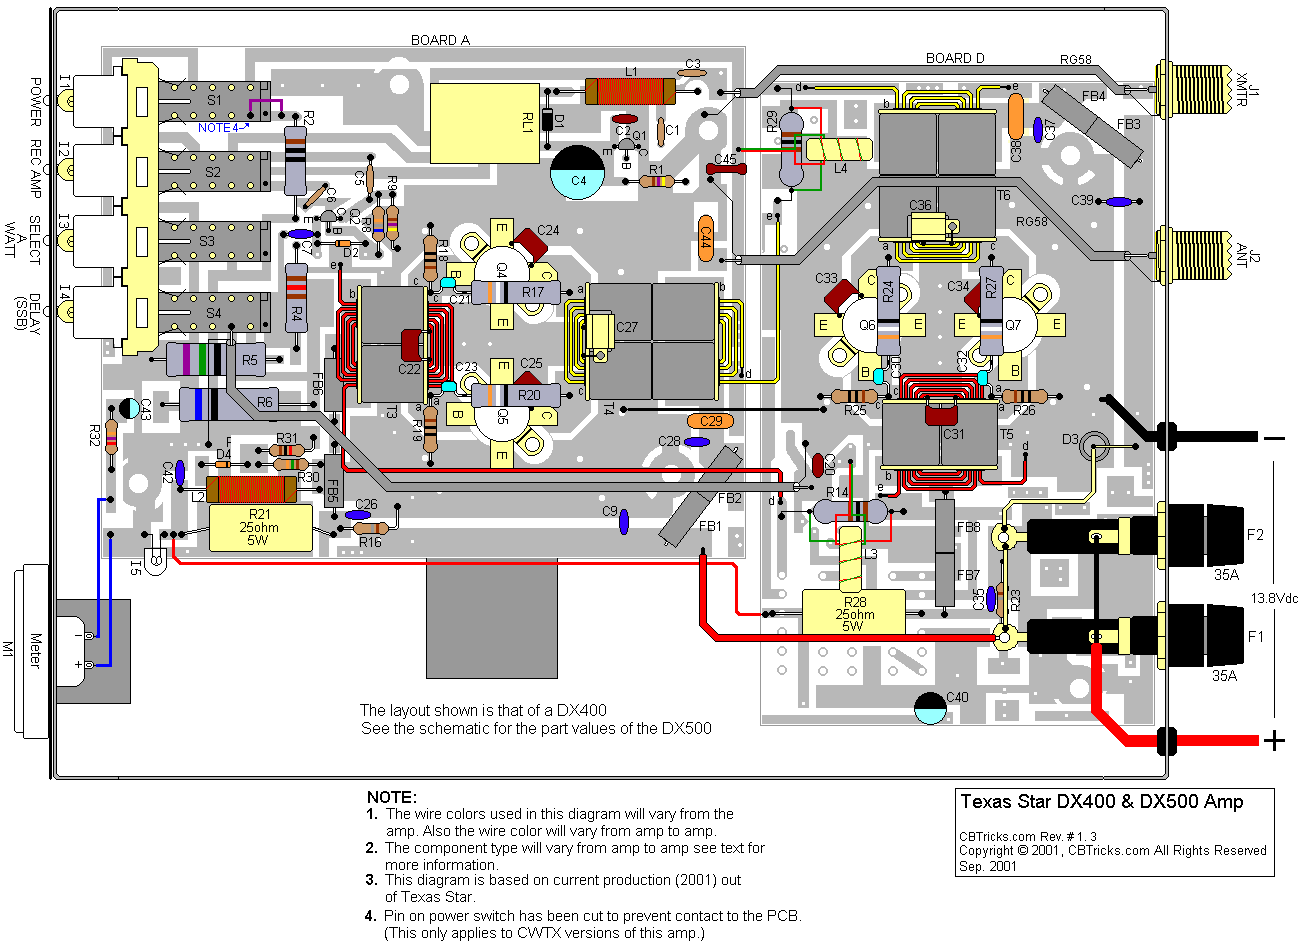 dx400-dx500_inter_connection_layout.gif